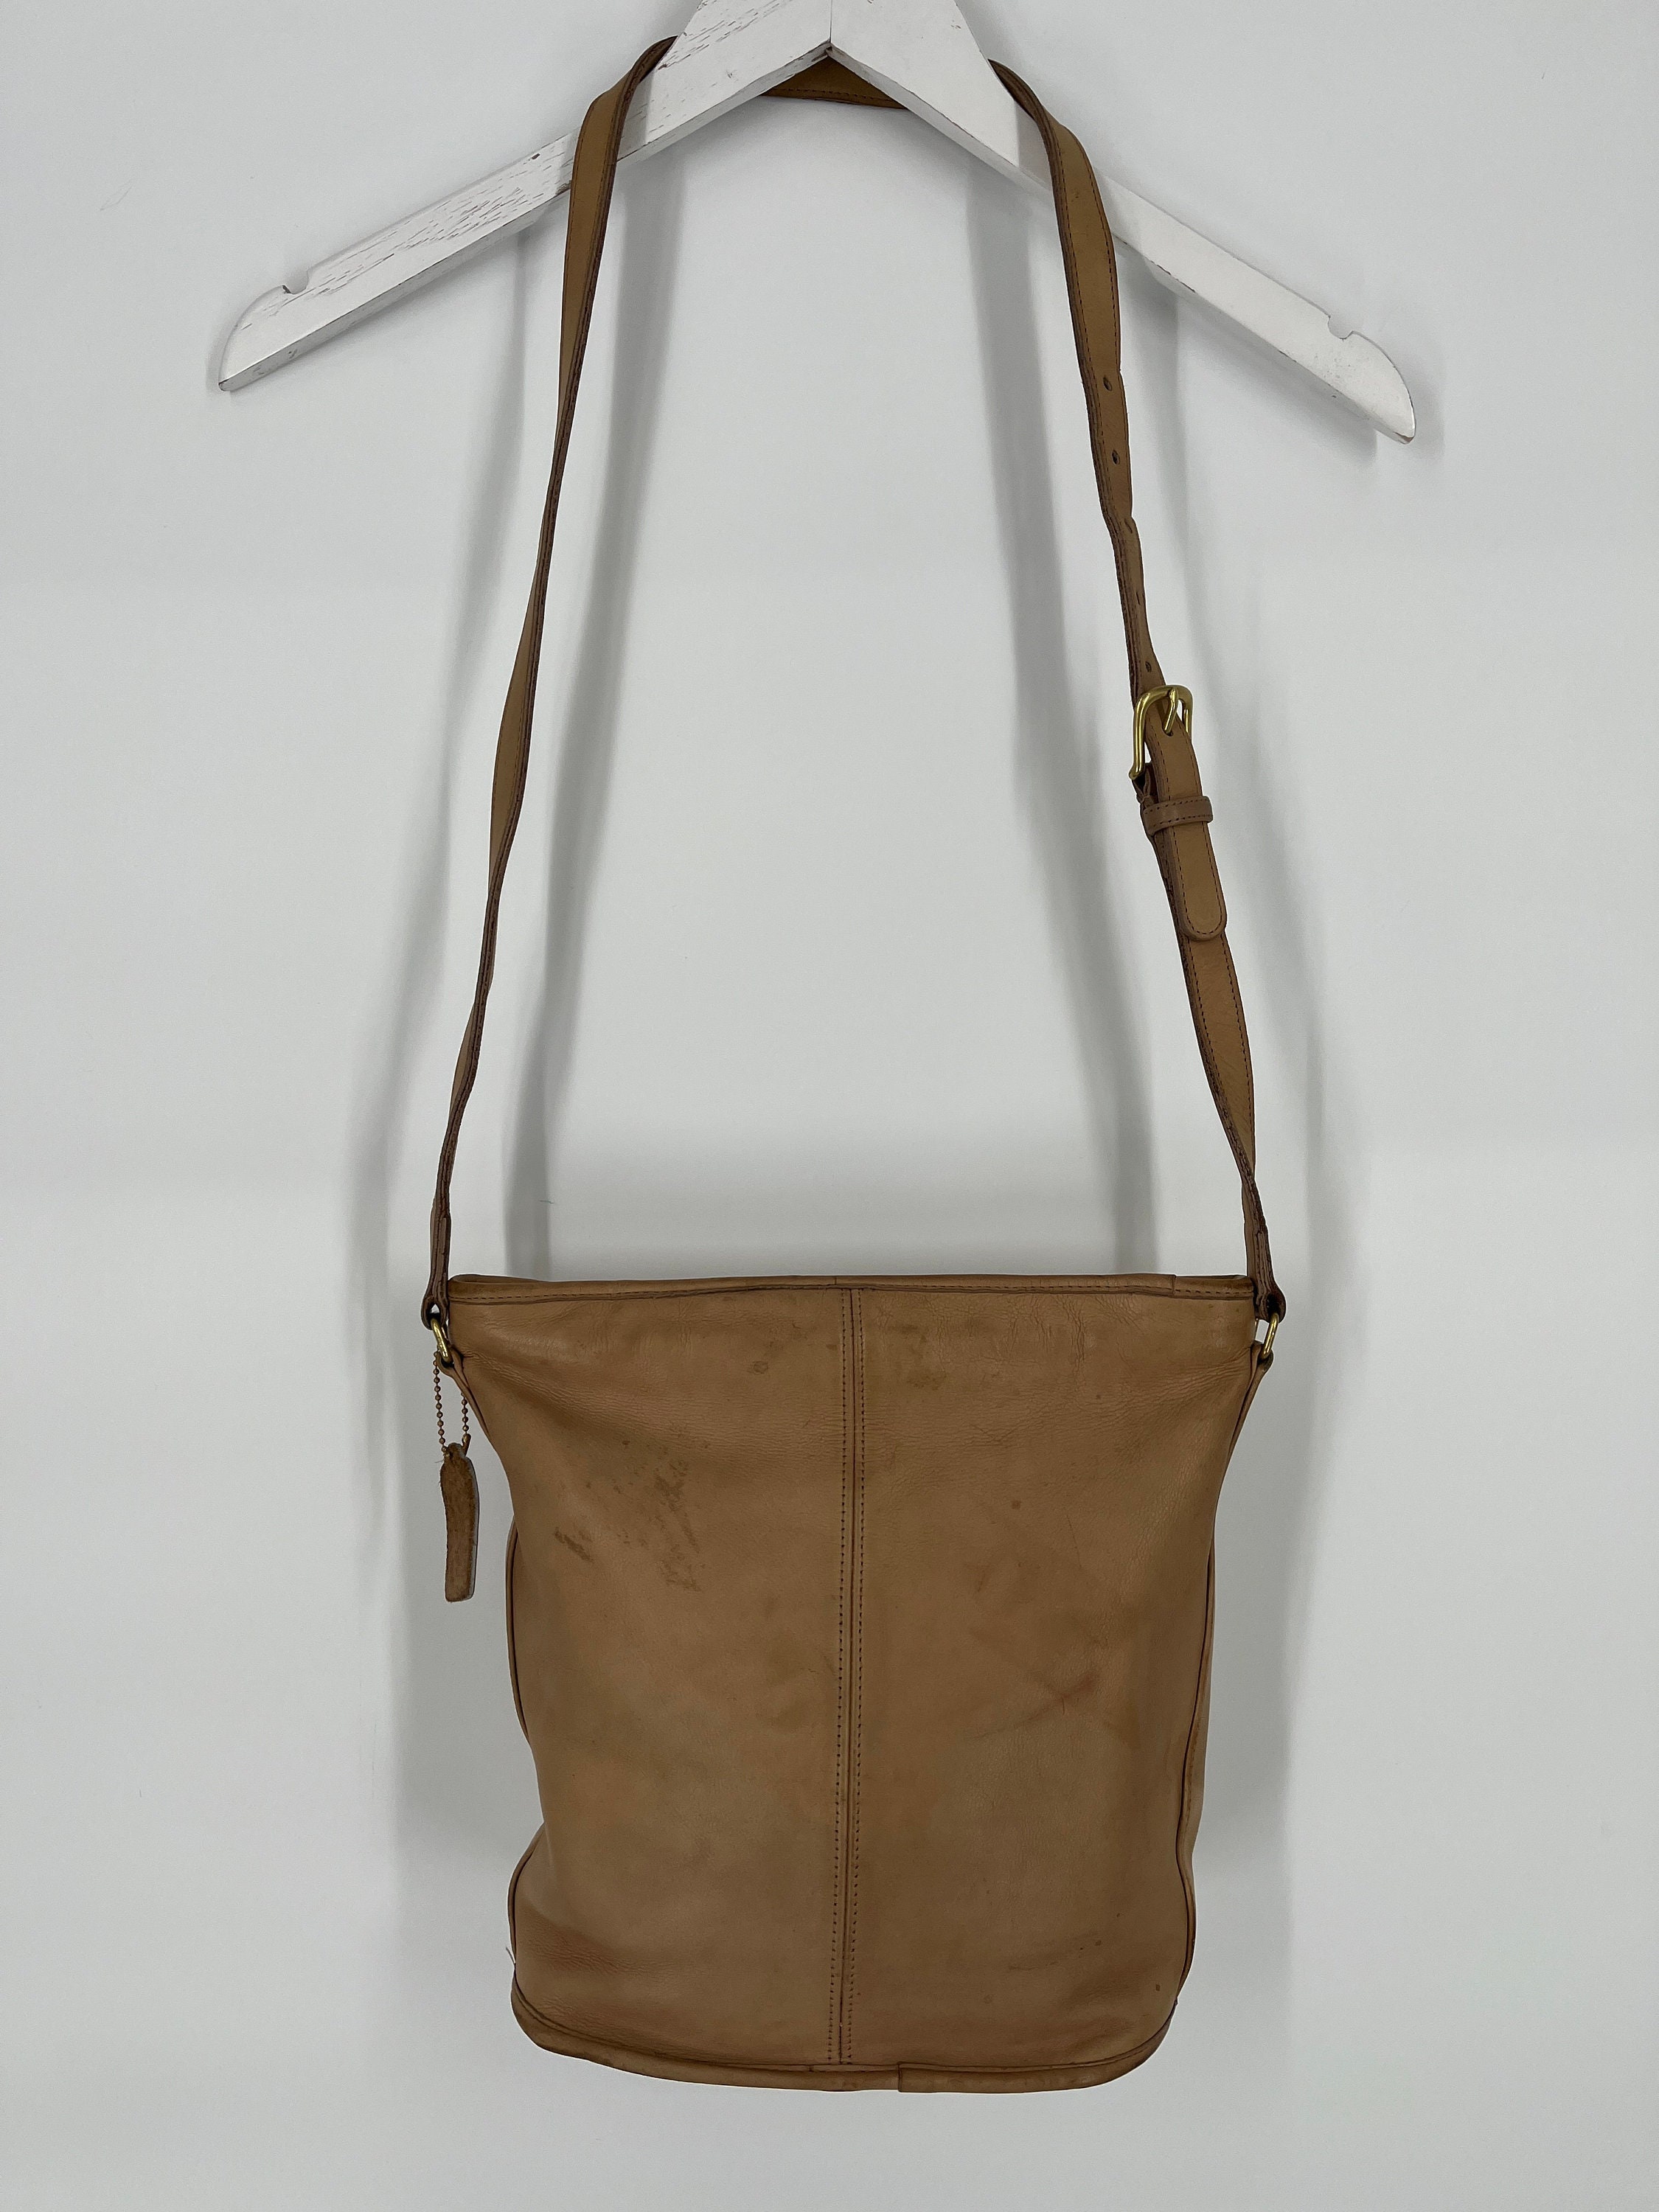  Simple Modern Canvas Tote Bag for Women, Large Work Shoulder- Bag with-Laptop-Sleever and Zipper Top, Canvas Exterior and Vegan Leather  Straps, -Travel,-Gym-and Pool with Pockets